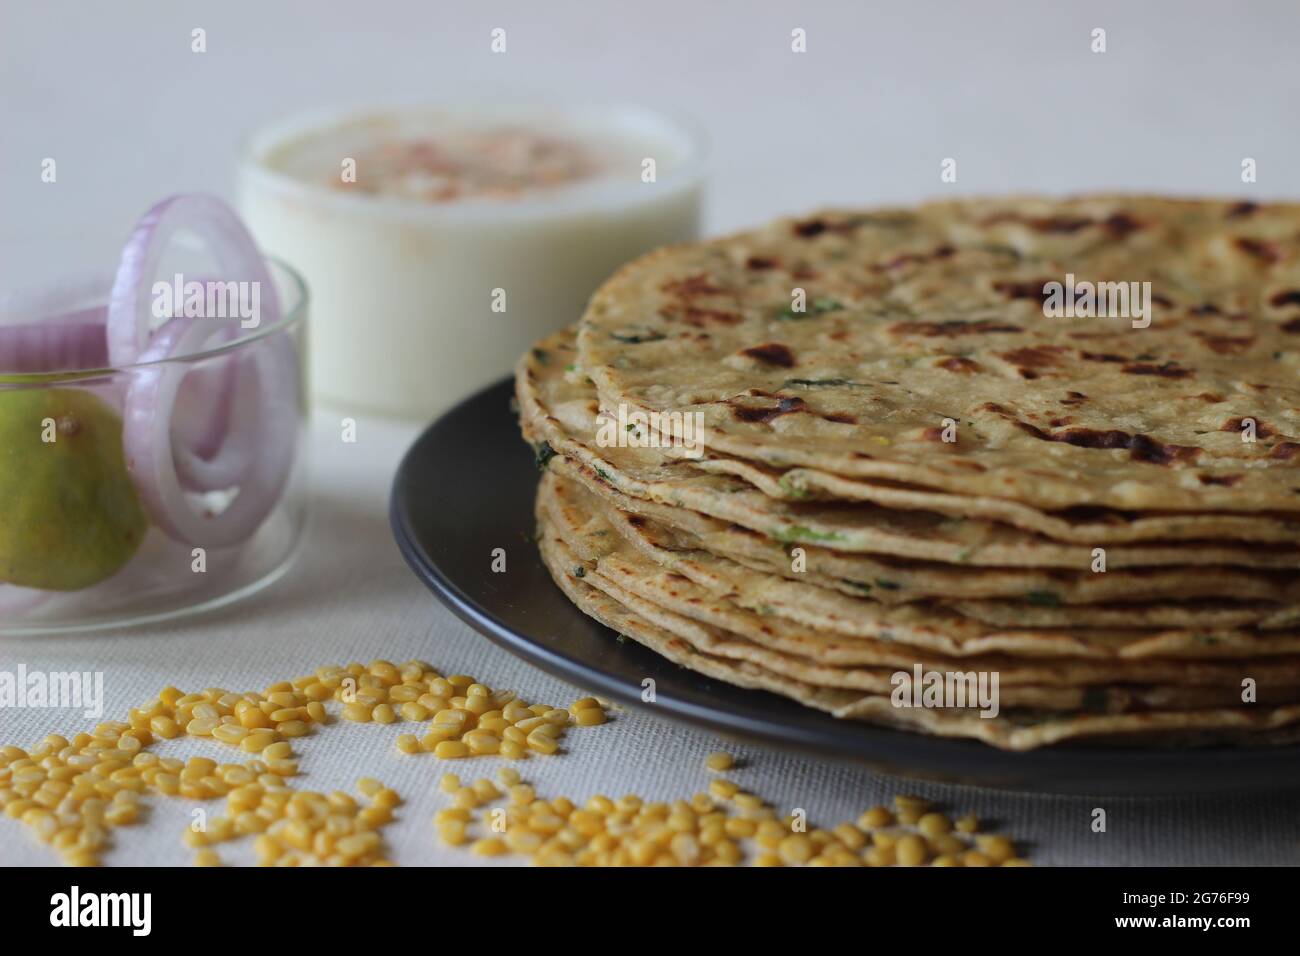 A high protein Indian flat bread with whole wheat and lentils. Popularly known as moong dal paratha in many parts of India. Shot on white background. Stock Photo